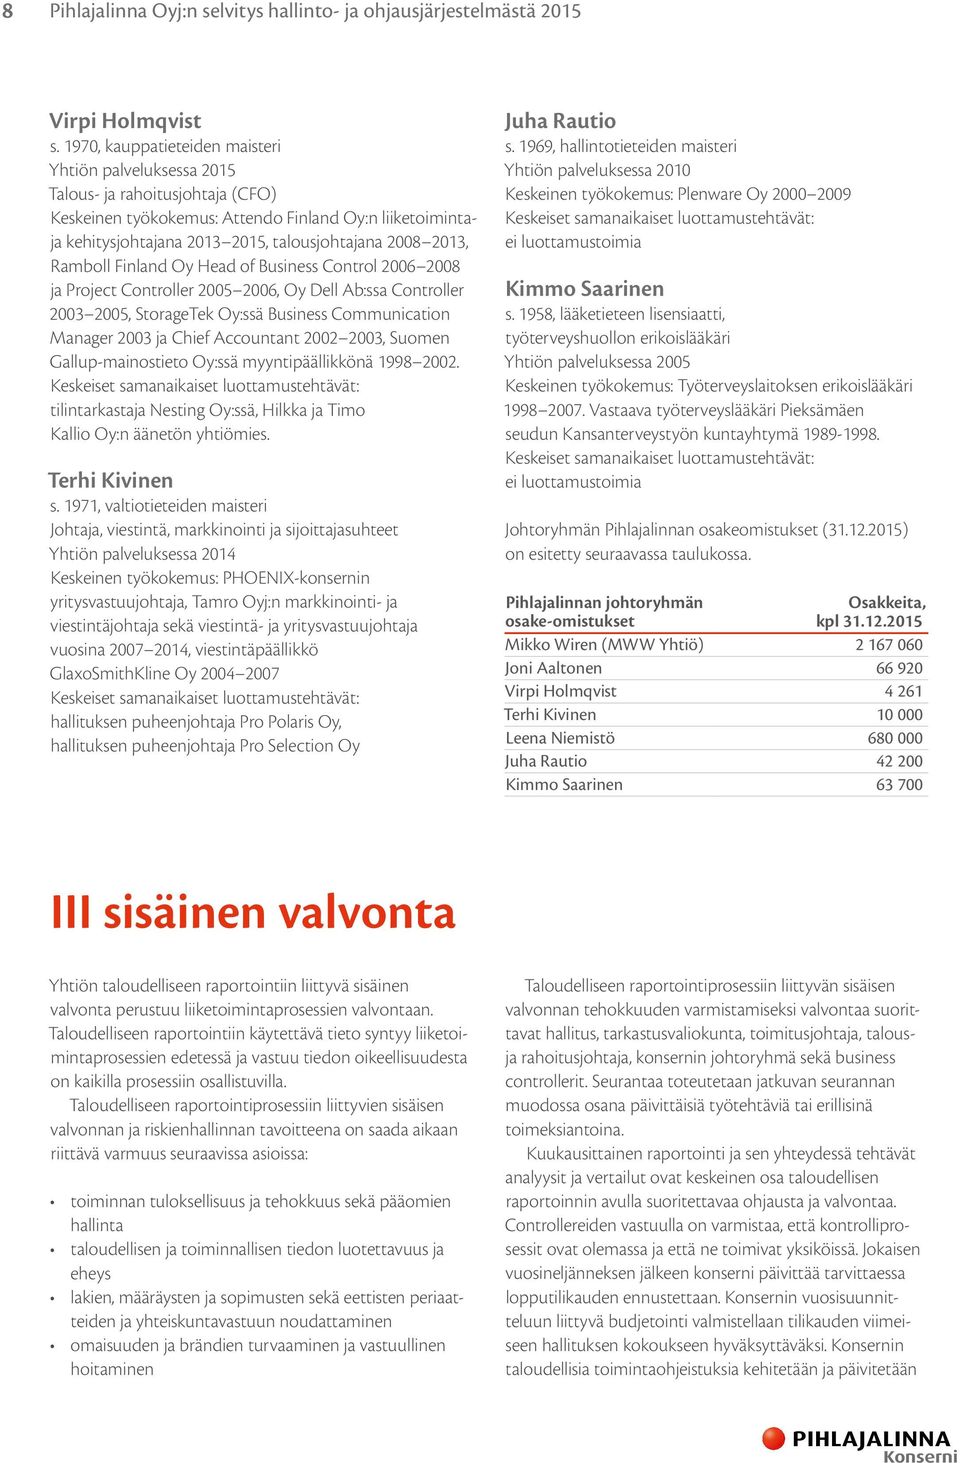 2013, Ramboll Finland Oy Head of Business Control 2006 2008 ja Project Controller 2005 2006, Oy Dell Ab:ssa Controller 2003 2005, StorageTek Oy:ssä Business Communication Manager 2003 ja Chief